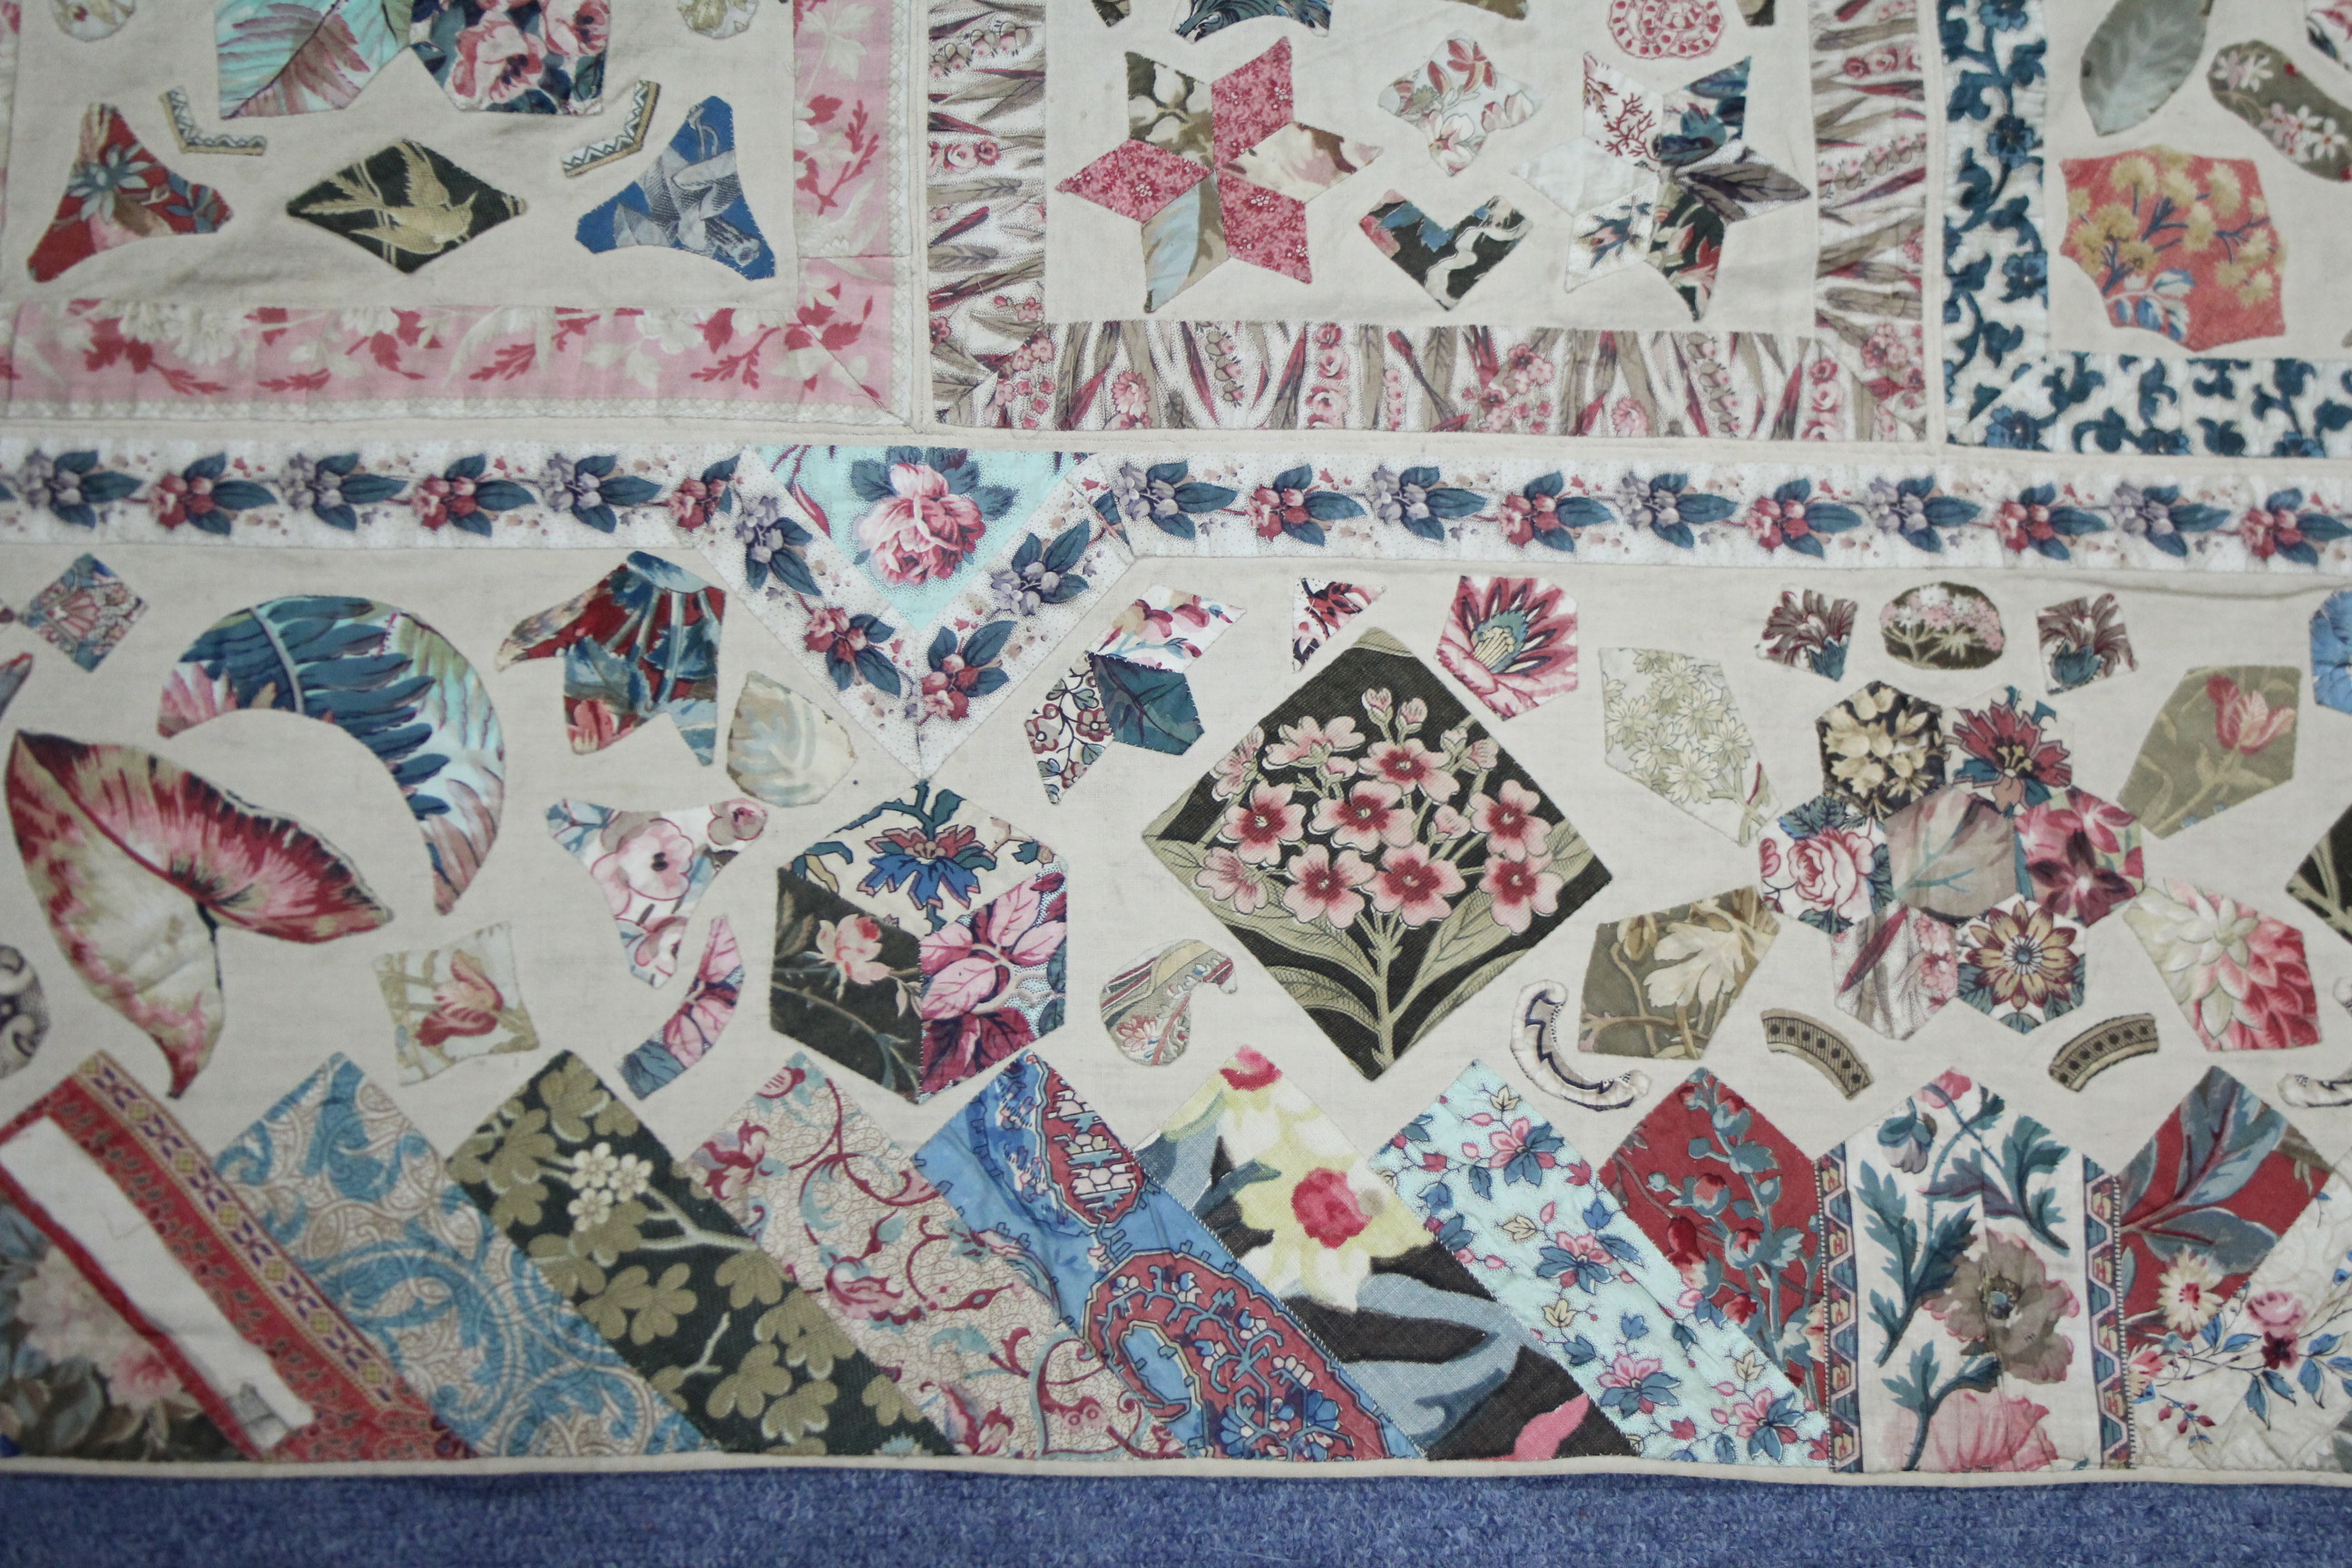 A VICTORIAN PATCHWORK BEDSPREAD or WALL HANGING comprising a wide variety of printed fabrics cut - Image 4 of 5